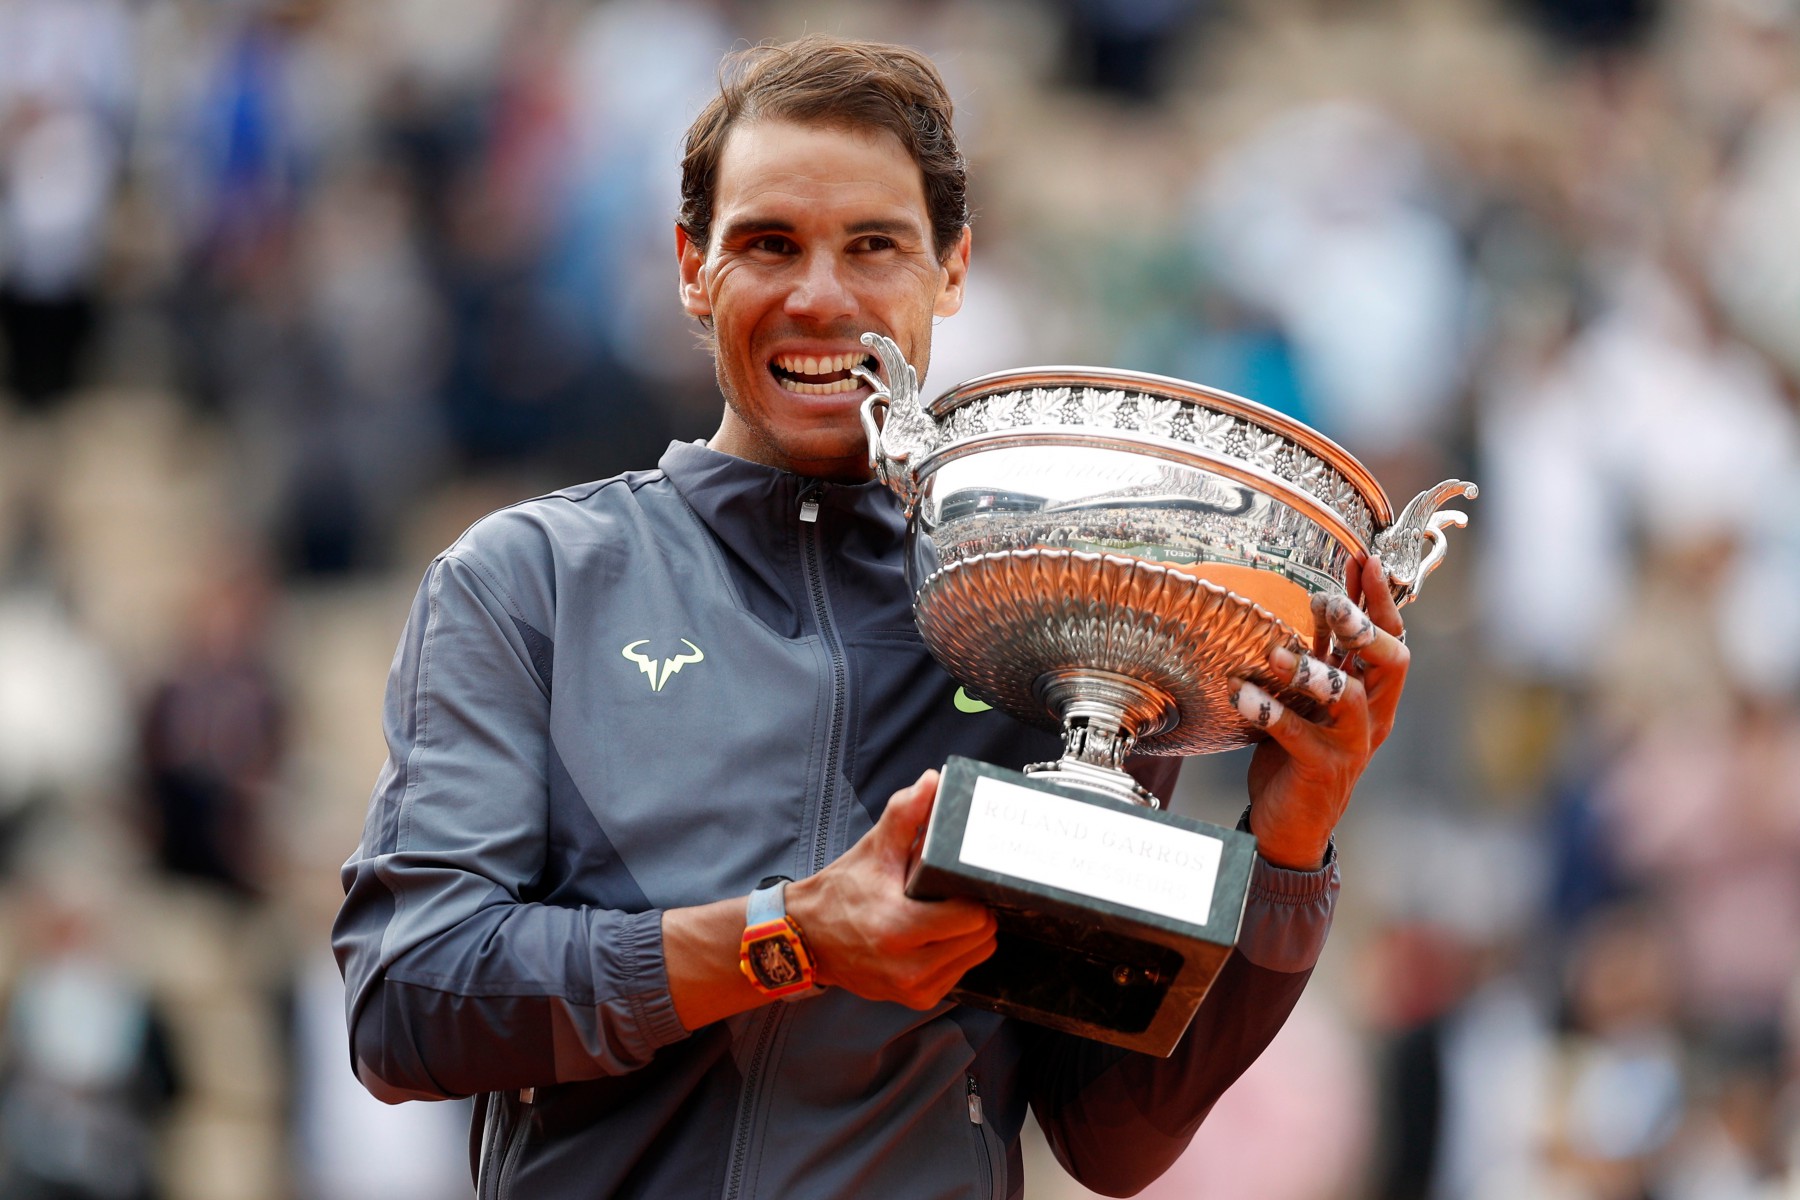 Nadal has picked up four titles this year including his 12th French Open crown on the clay in Paris